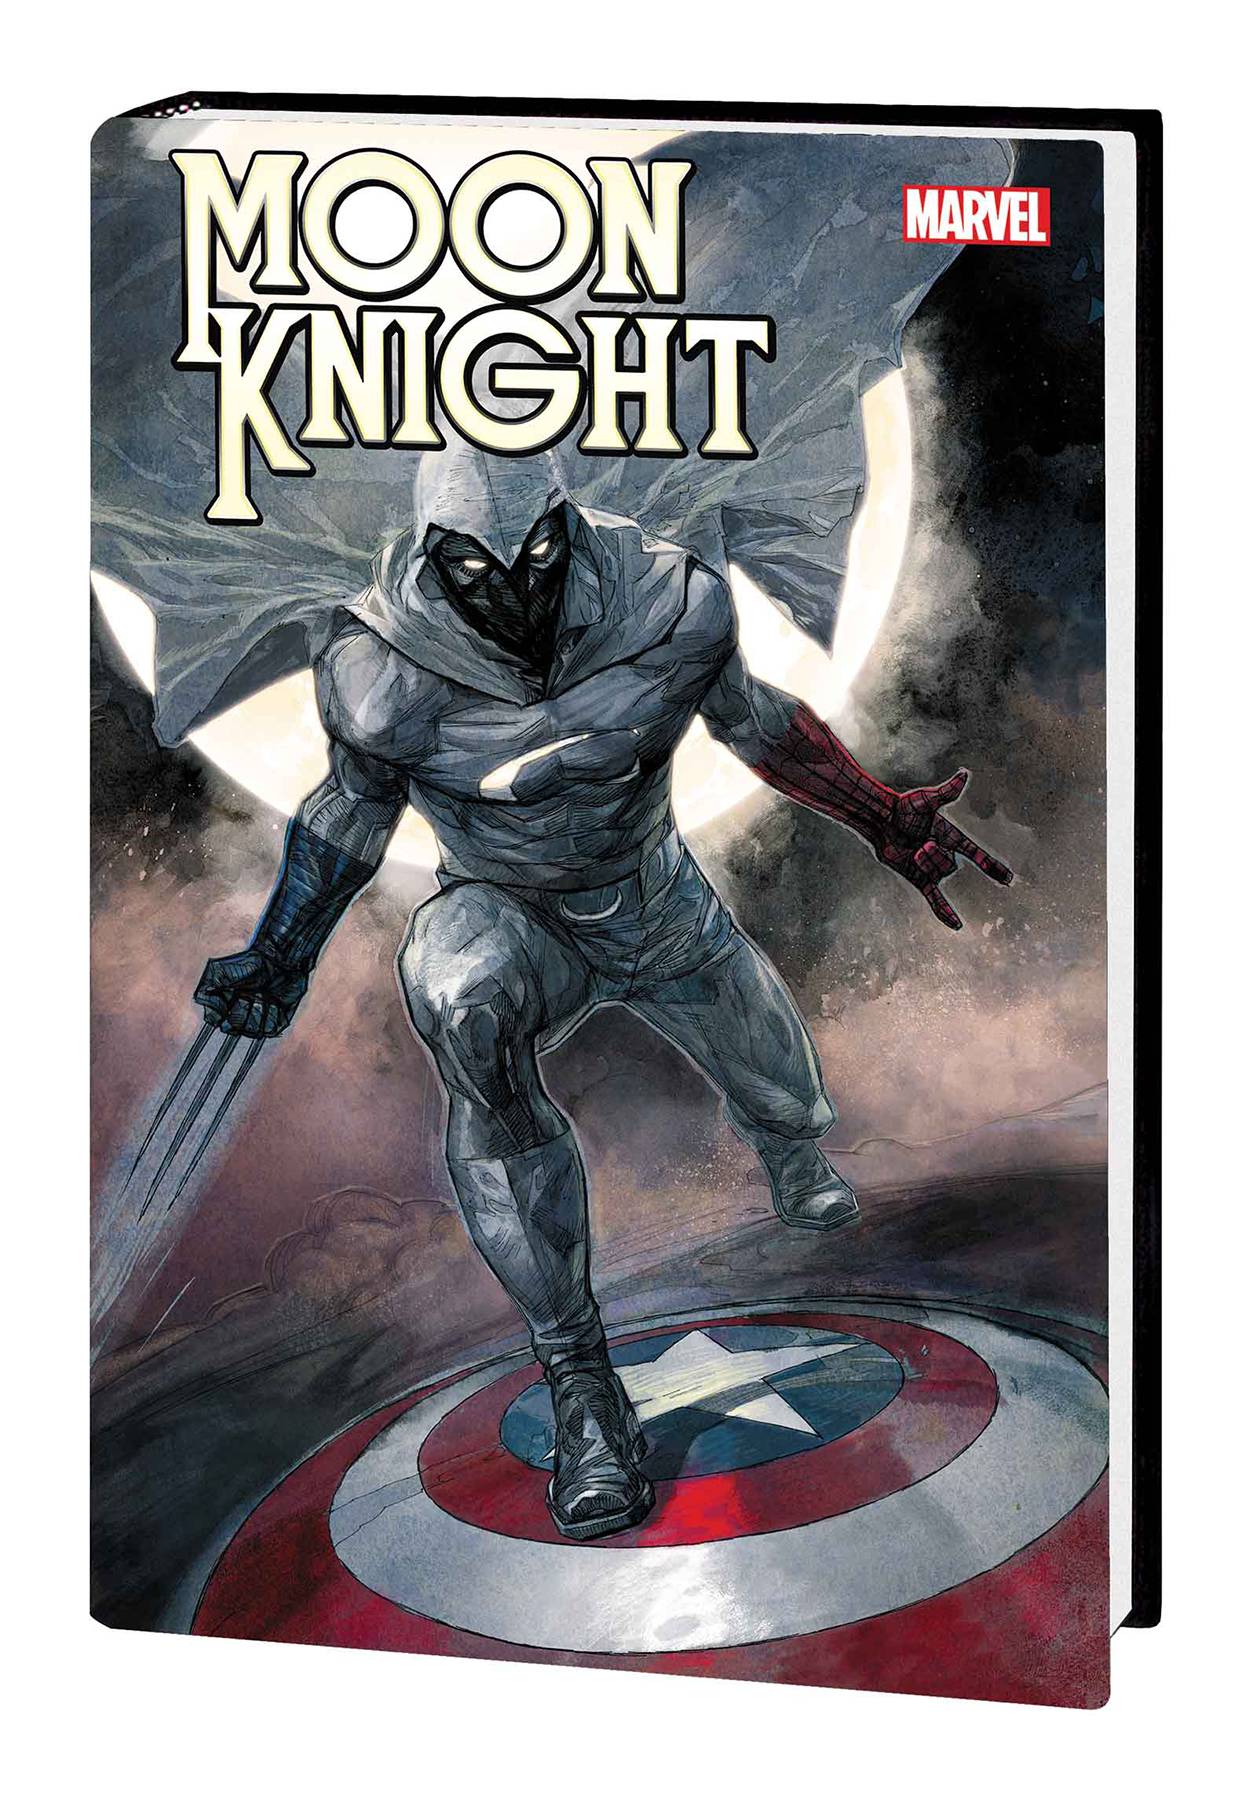 Moon Knight by Brian Michael Bendis & Alex Maleev Hardcover